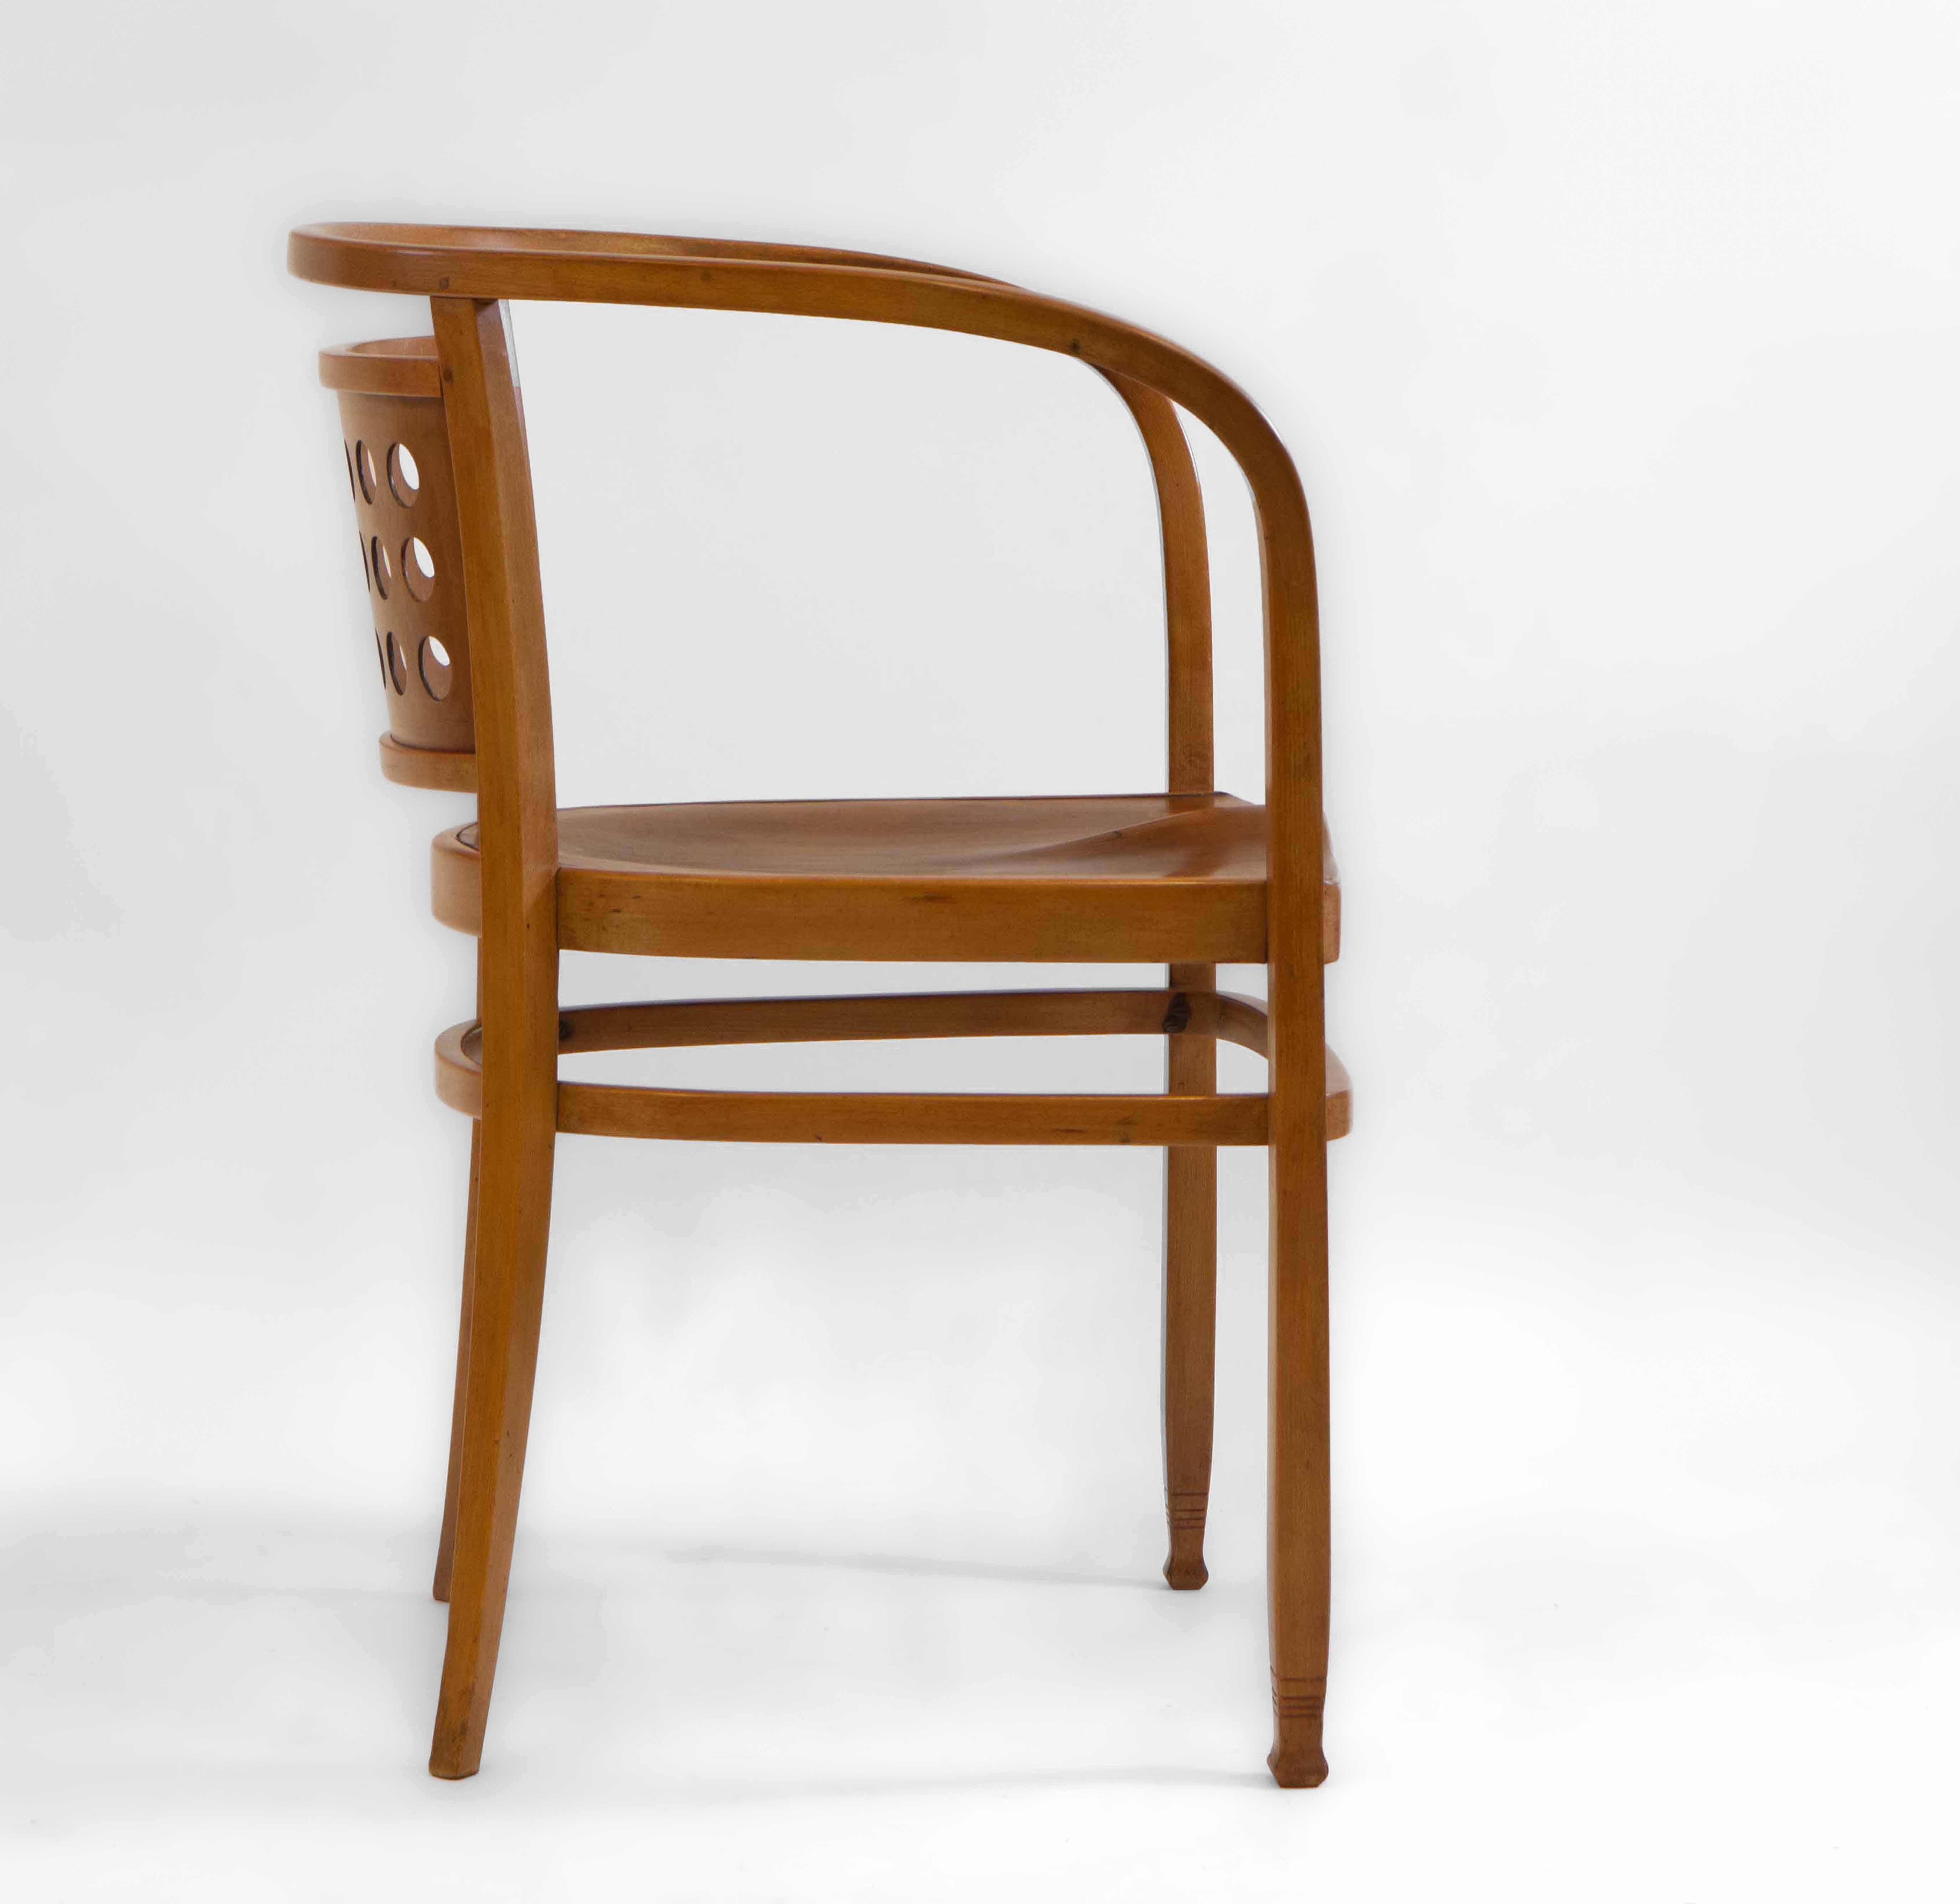  An antique Vienna Secessionist bentwood armchair designed by Otto Wagner (1841-1918) Model 721 - Circa 1905.

Manufactured by Jacob & Josef Kohn. Stamped J & J Kohn - Teschen - Austria, along with J. & J. Kohn paper label.

A stylishly simple